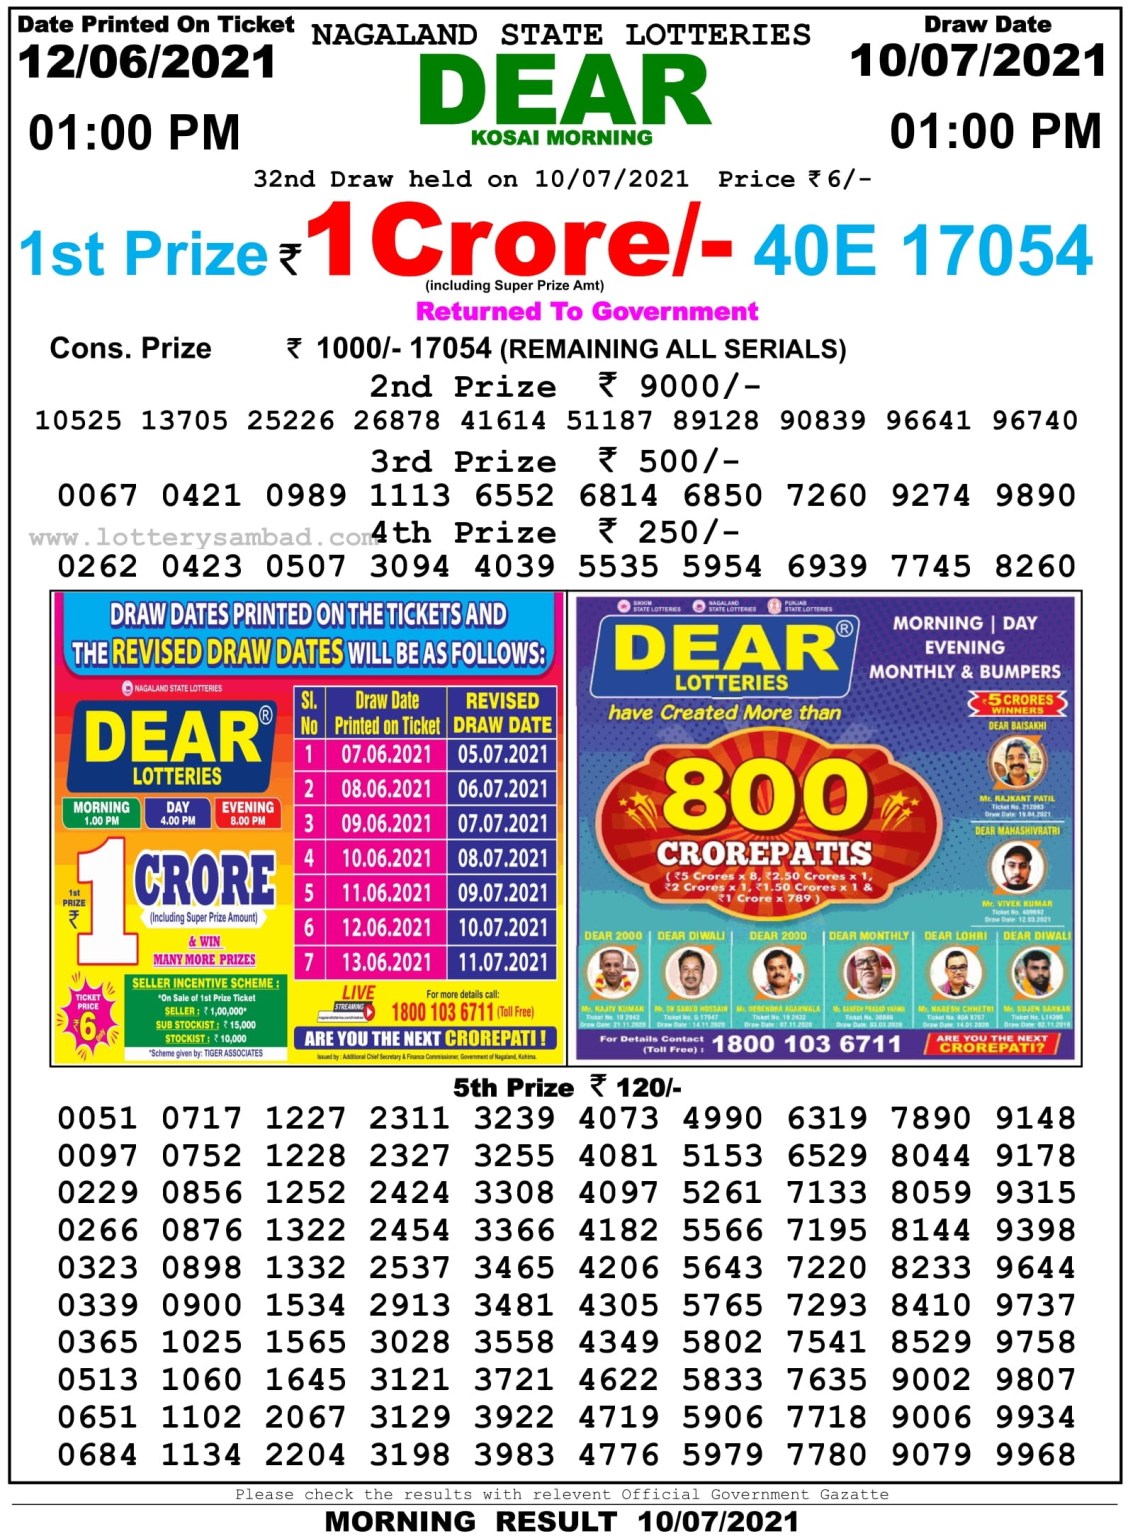 Dear Daily Lottery Result 01.00PM 10 Jul 2021